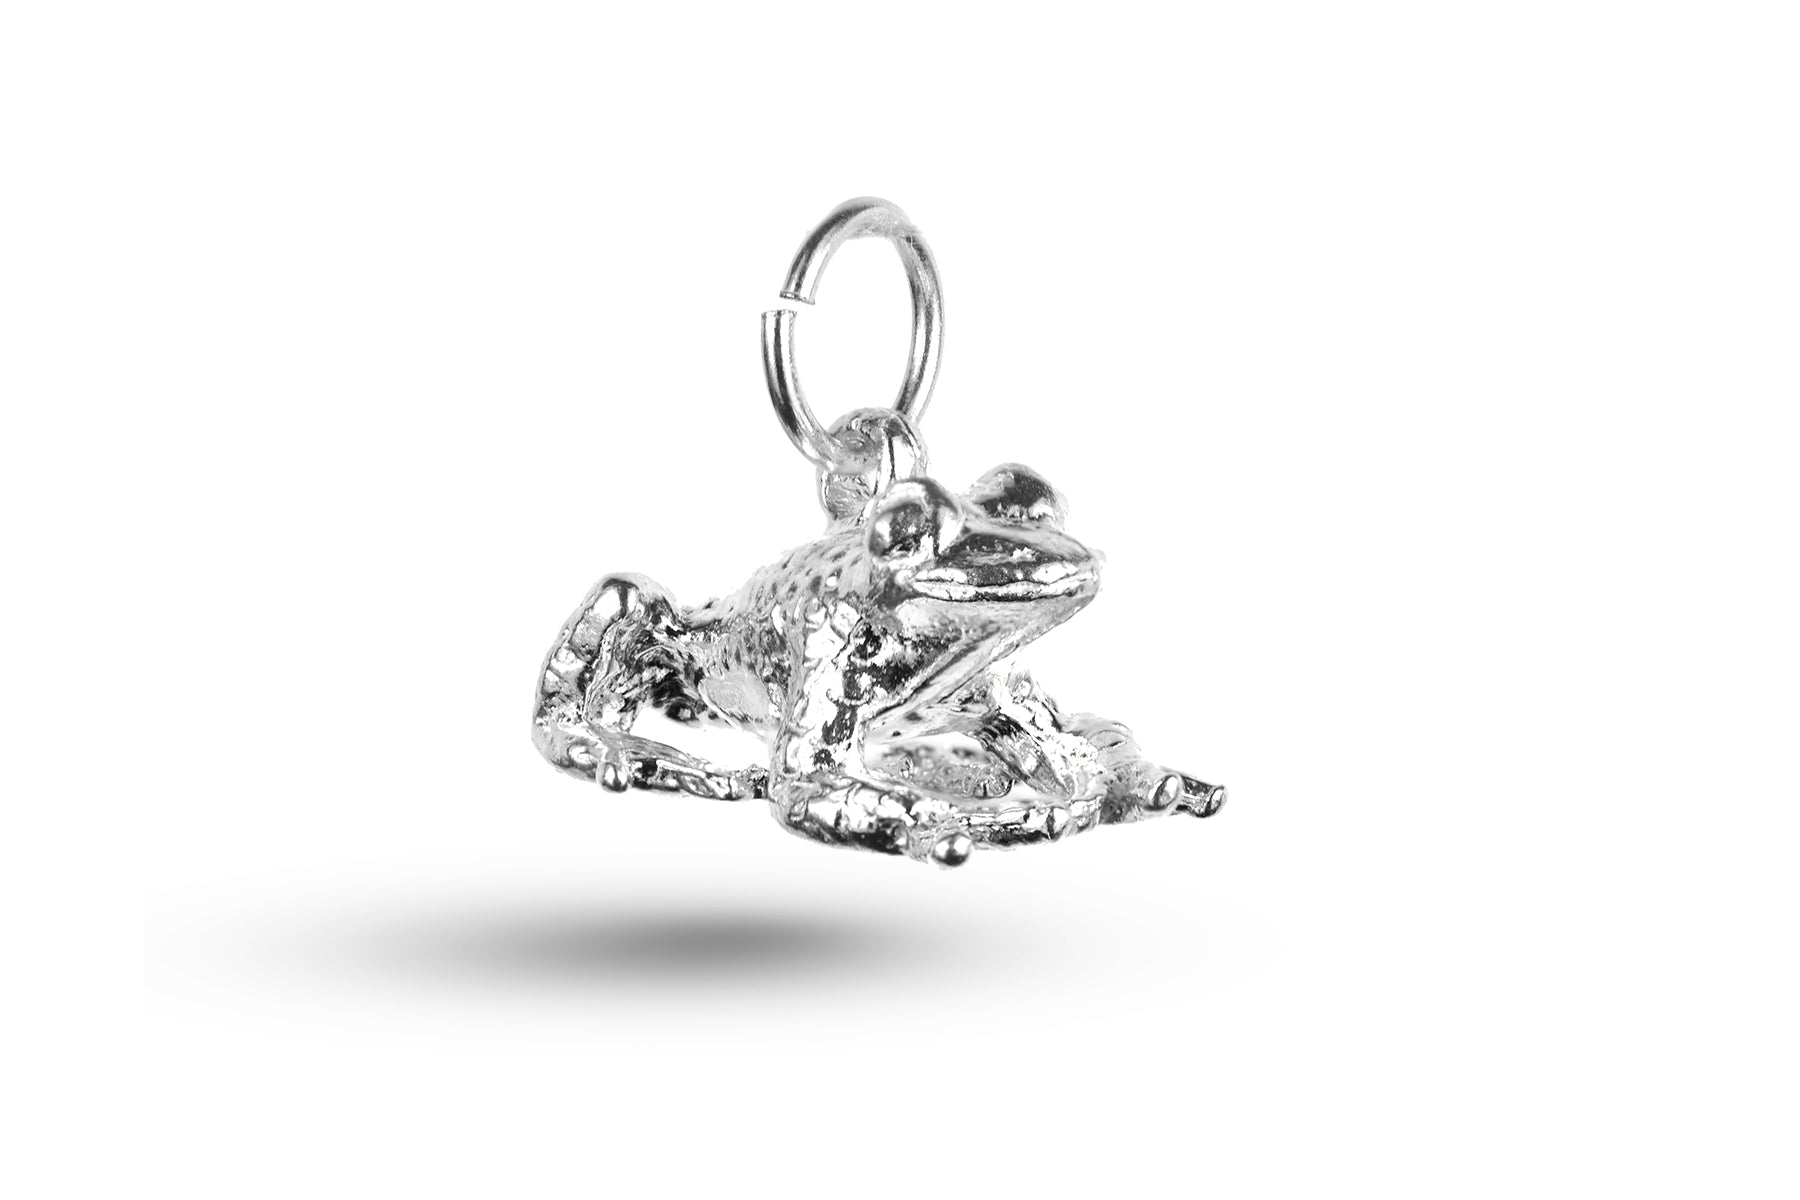 White gold Crouching Frog Charm.